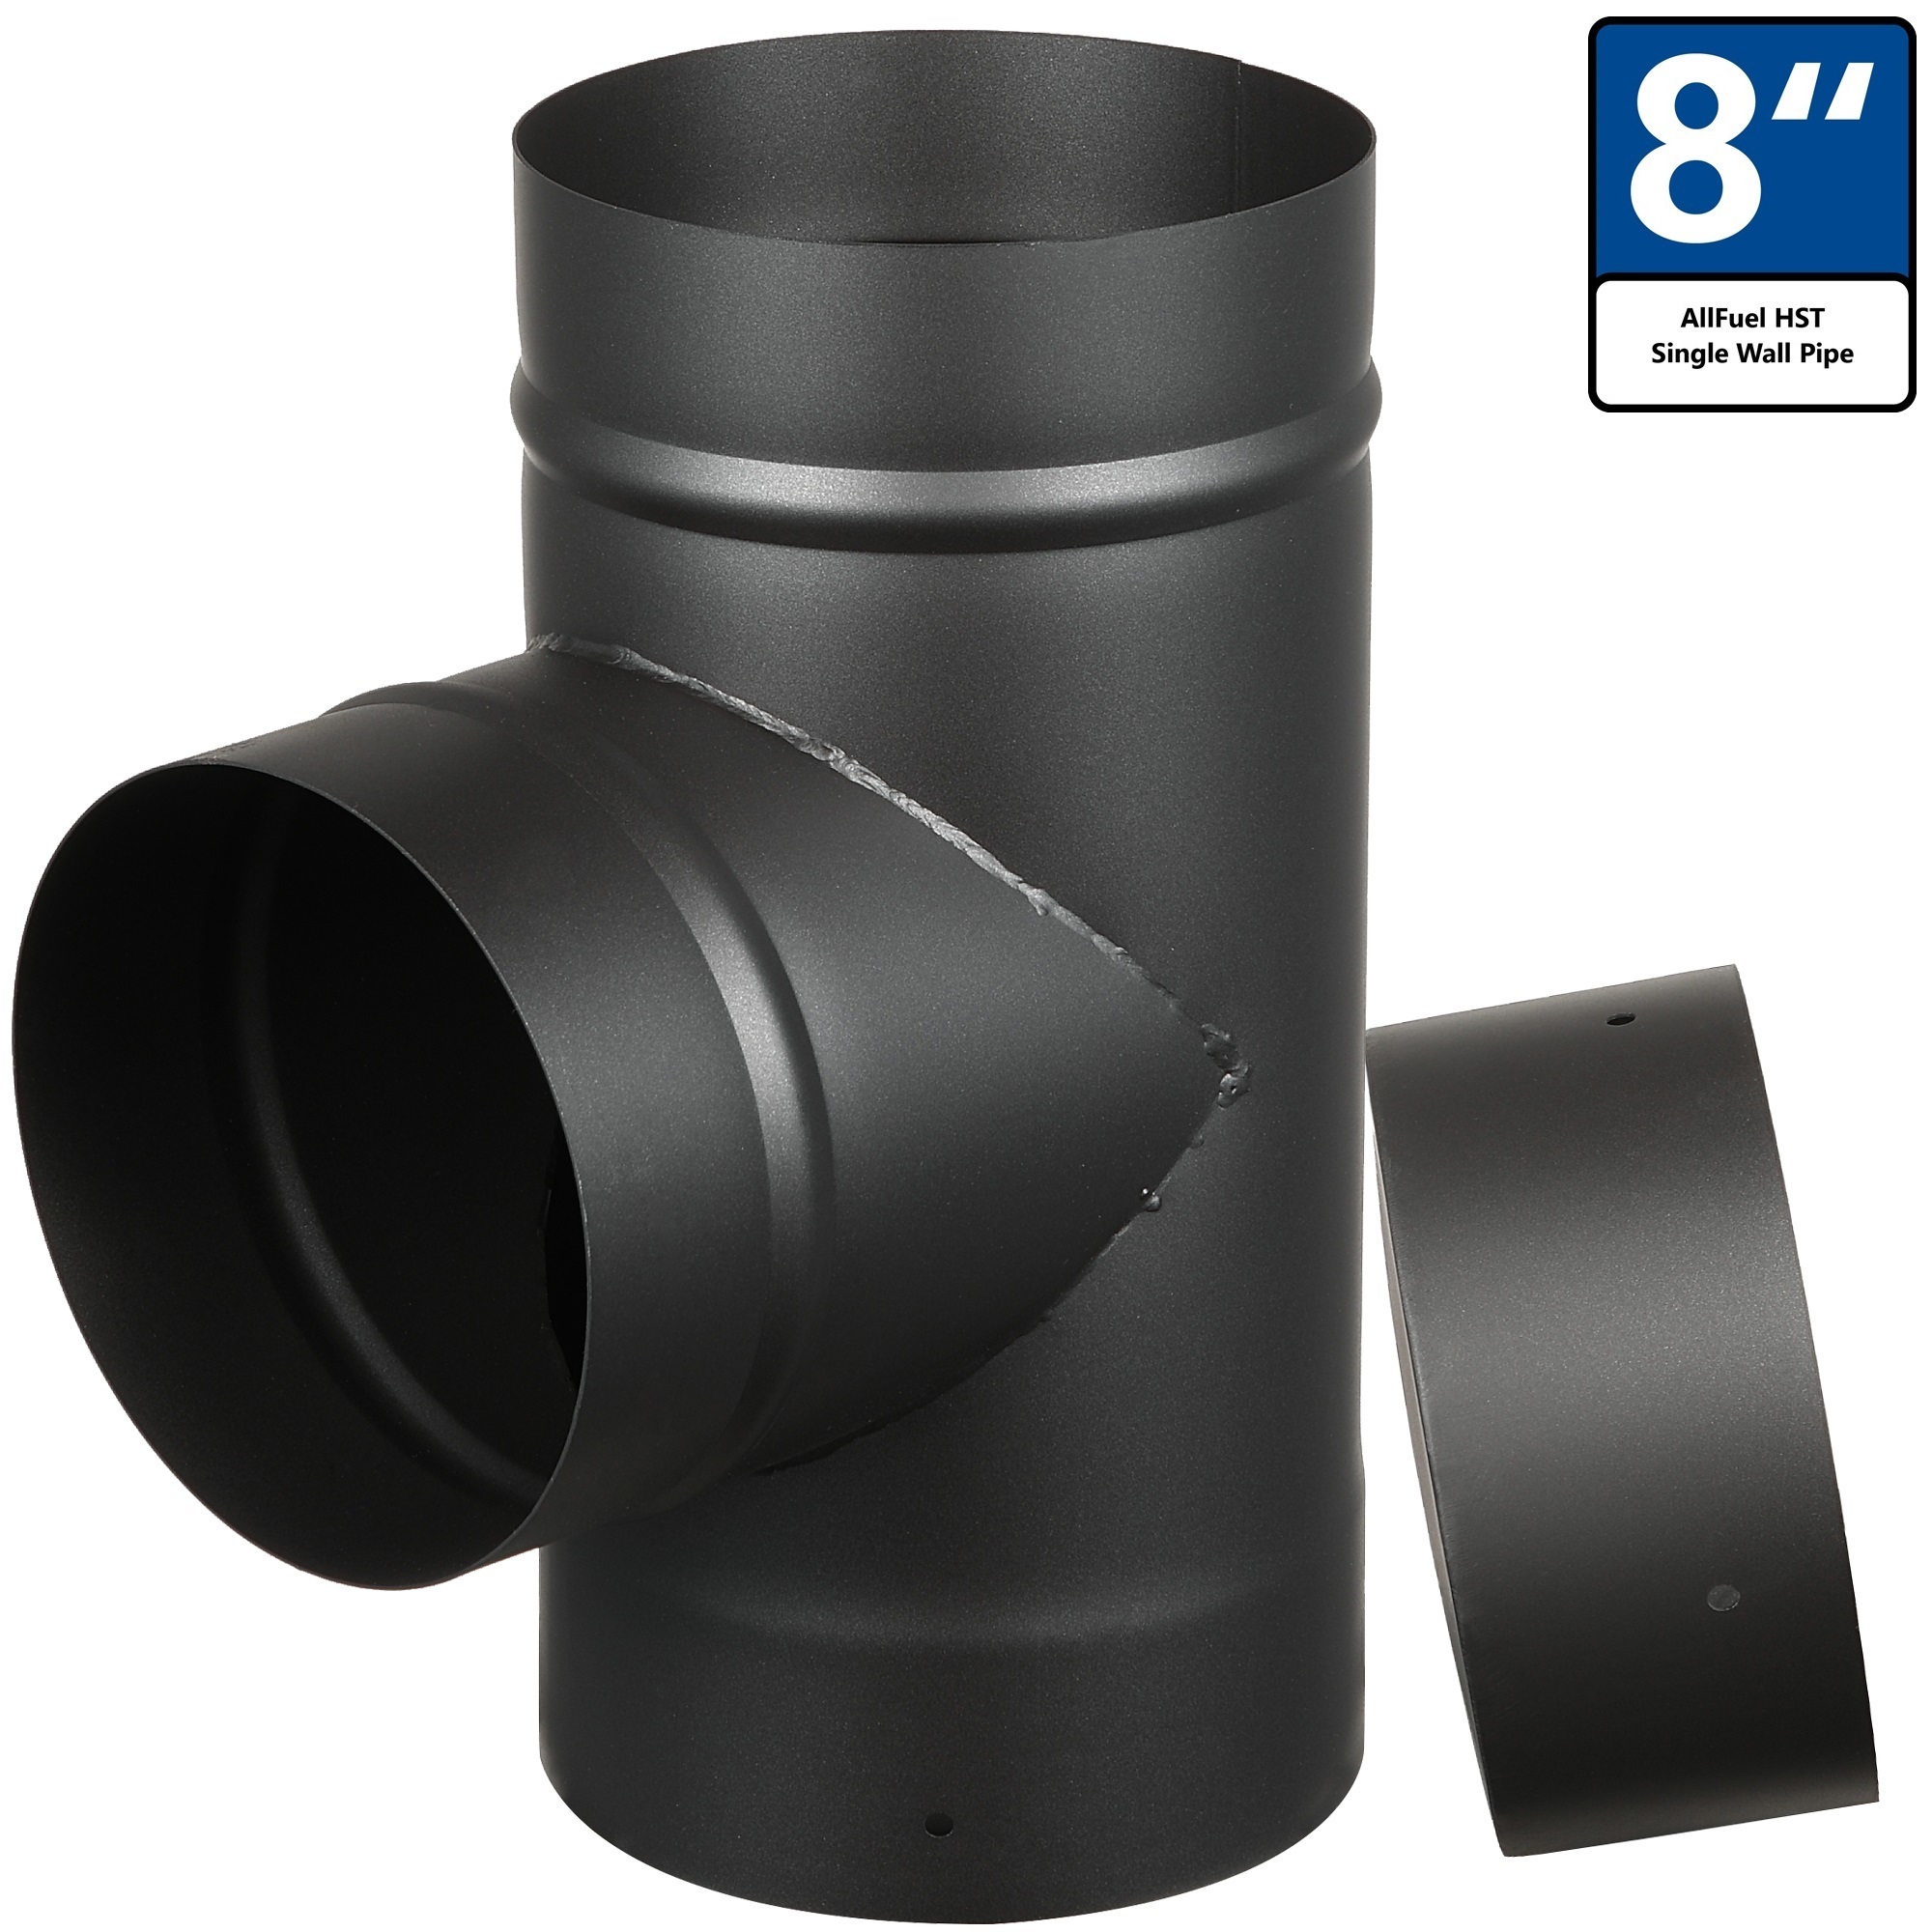 AllFuel HST, 8Inch Single Wall Tee Black Stove Pipe, Included (qty.) 1 Material Carbon Steel, Model BL.EV.RB.SHT8-ST